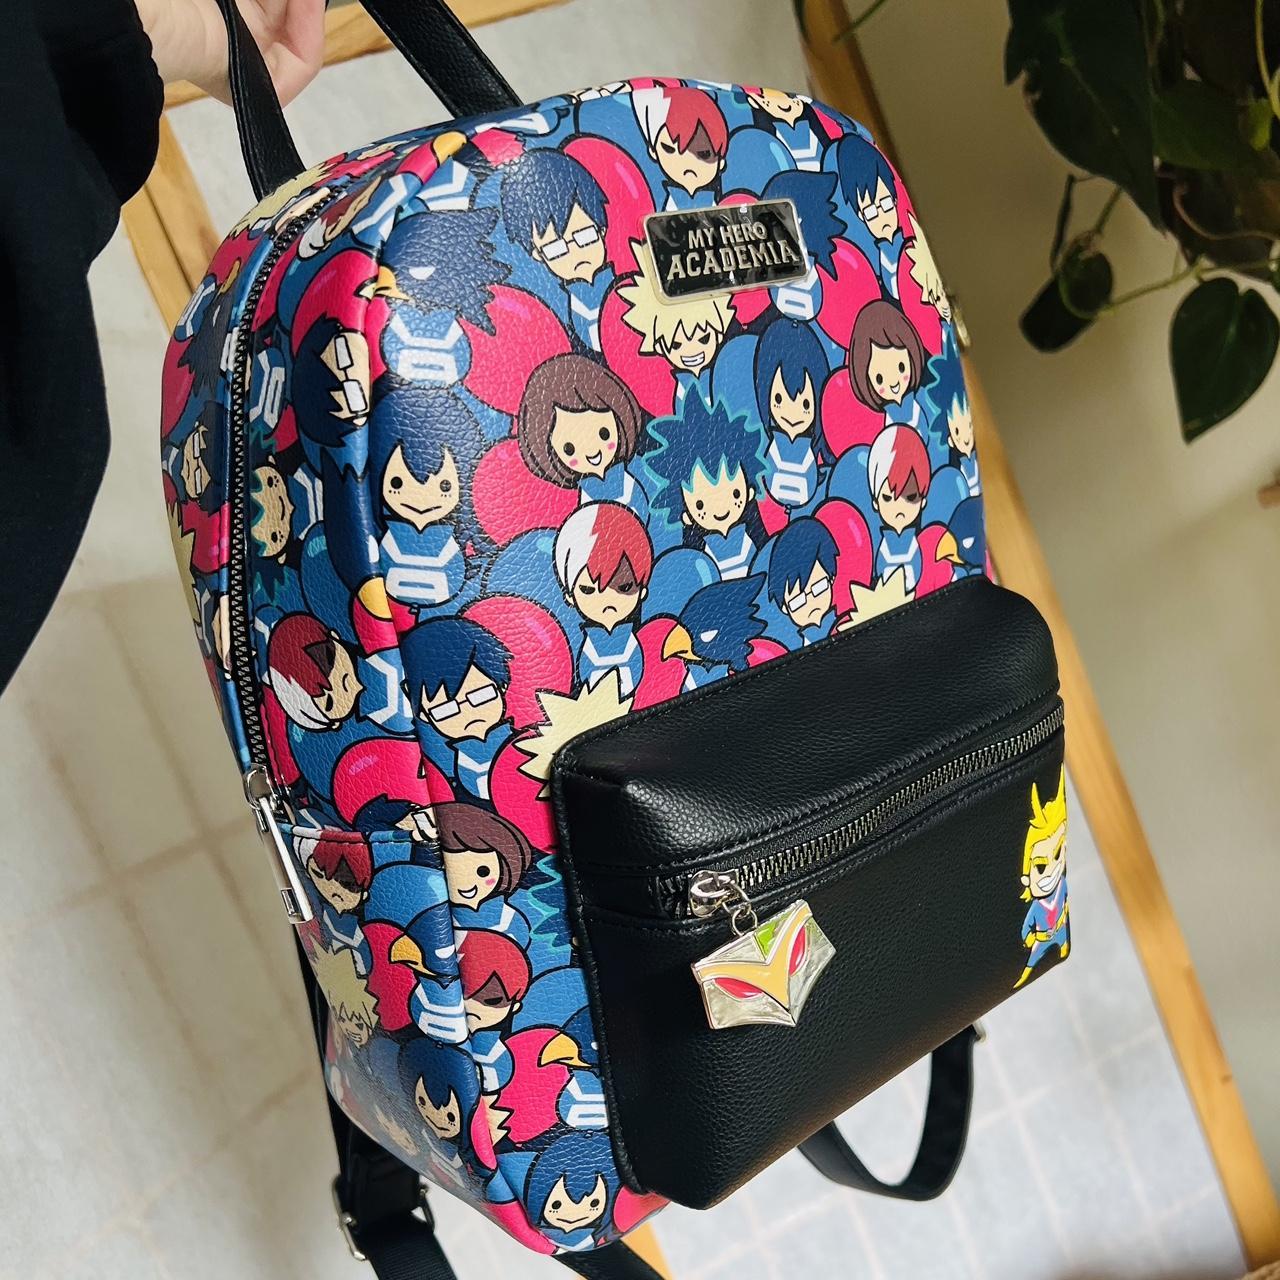 Loungefly's geeky backpacks are big business for Funko